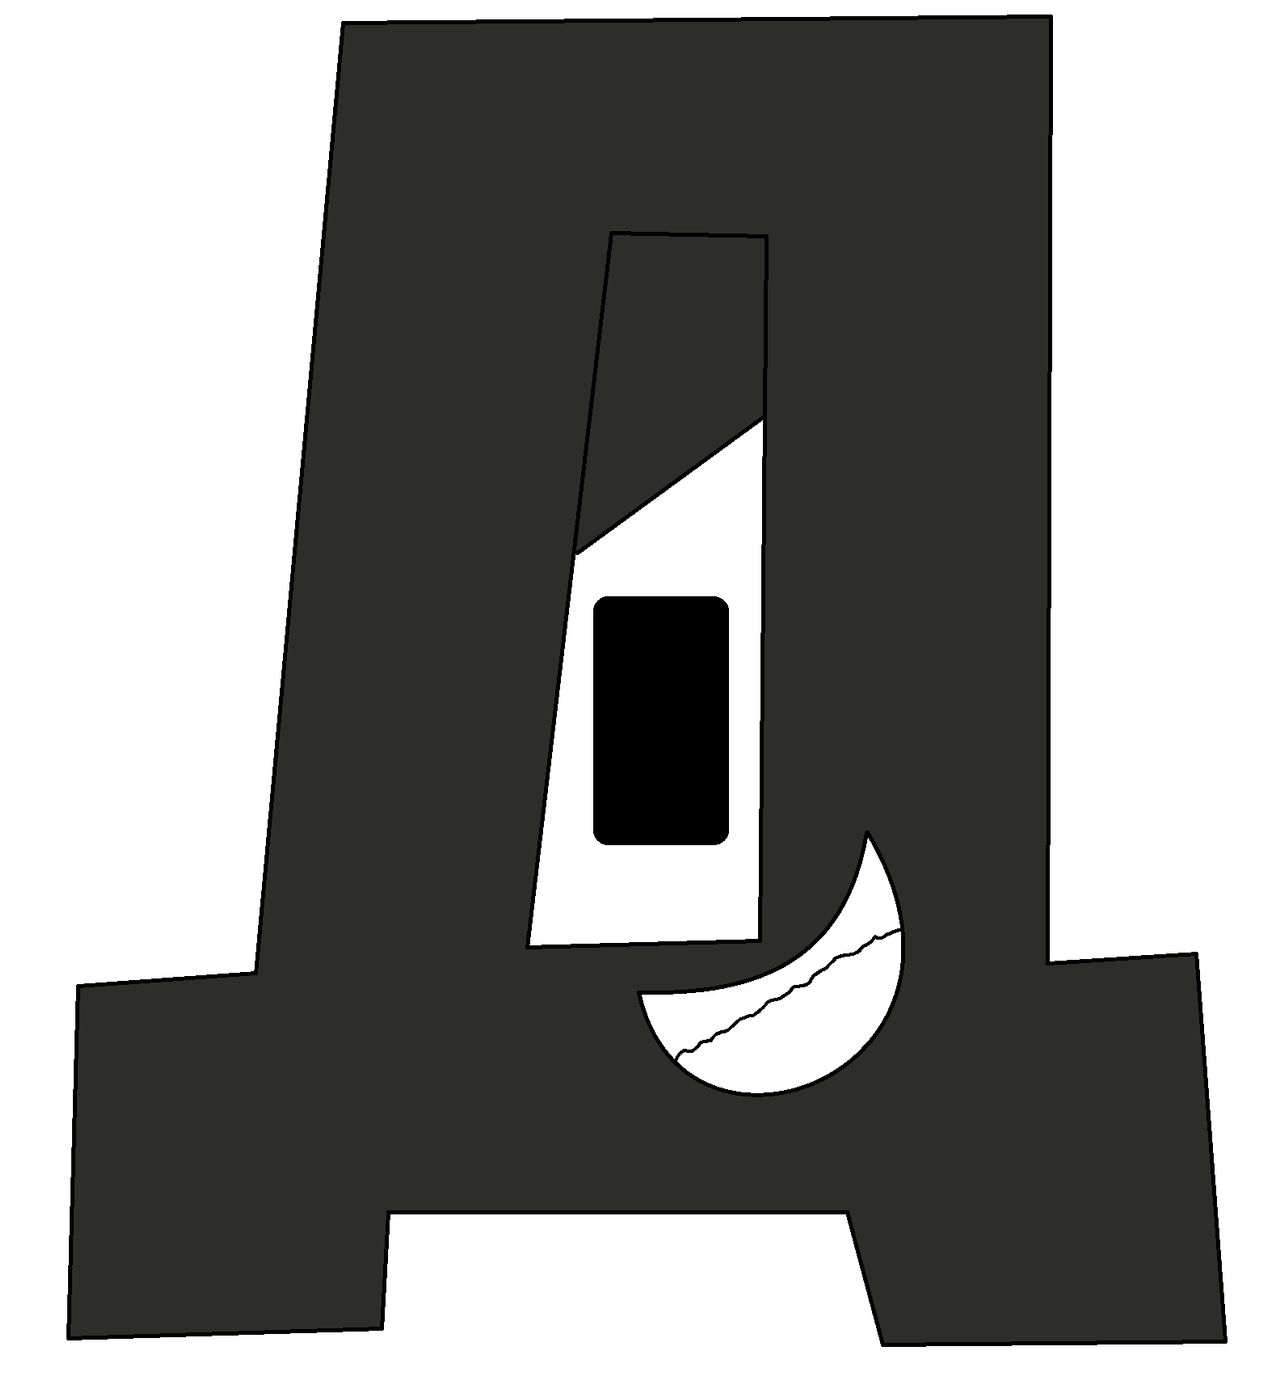 L From Alphabet Lore by g4merxethan on DeviantArt